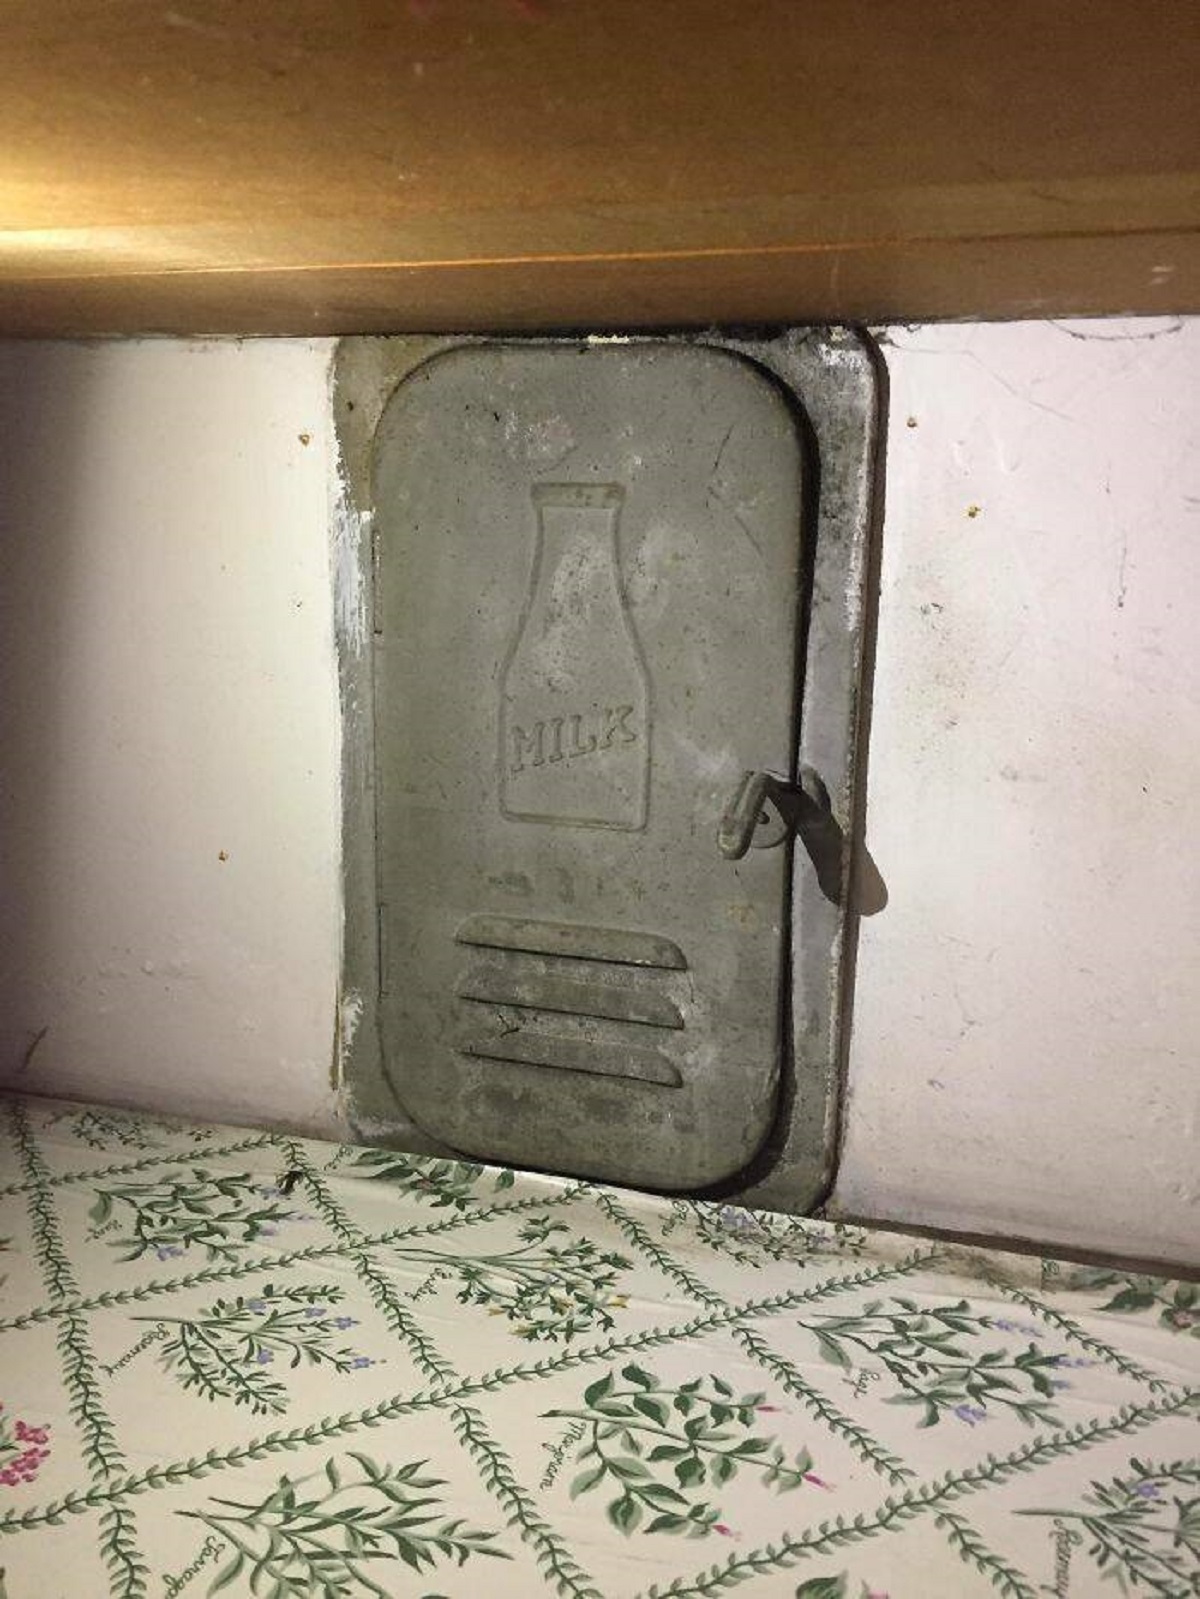 "Our New Apartment Has A Little Milk Door Under The Cabinets"